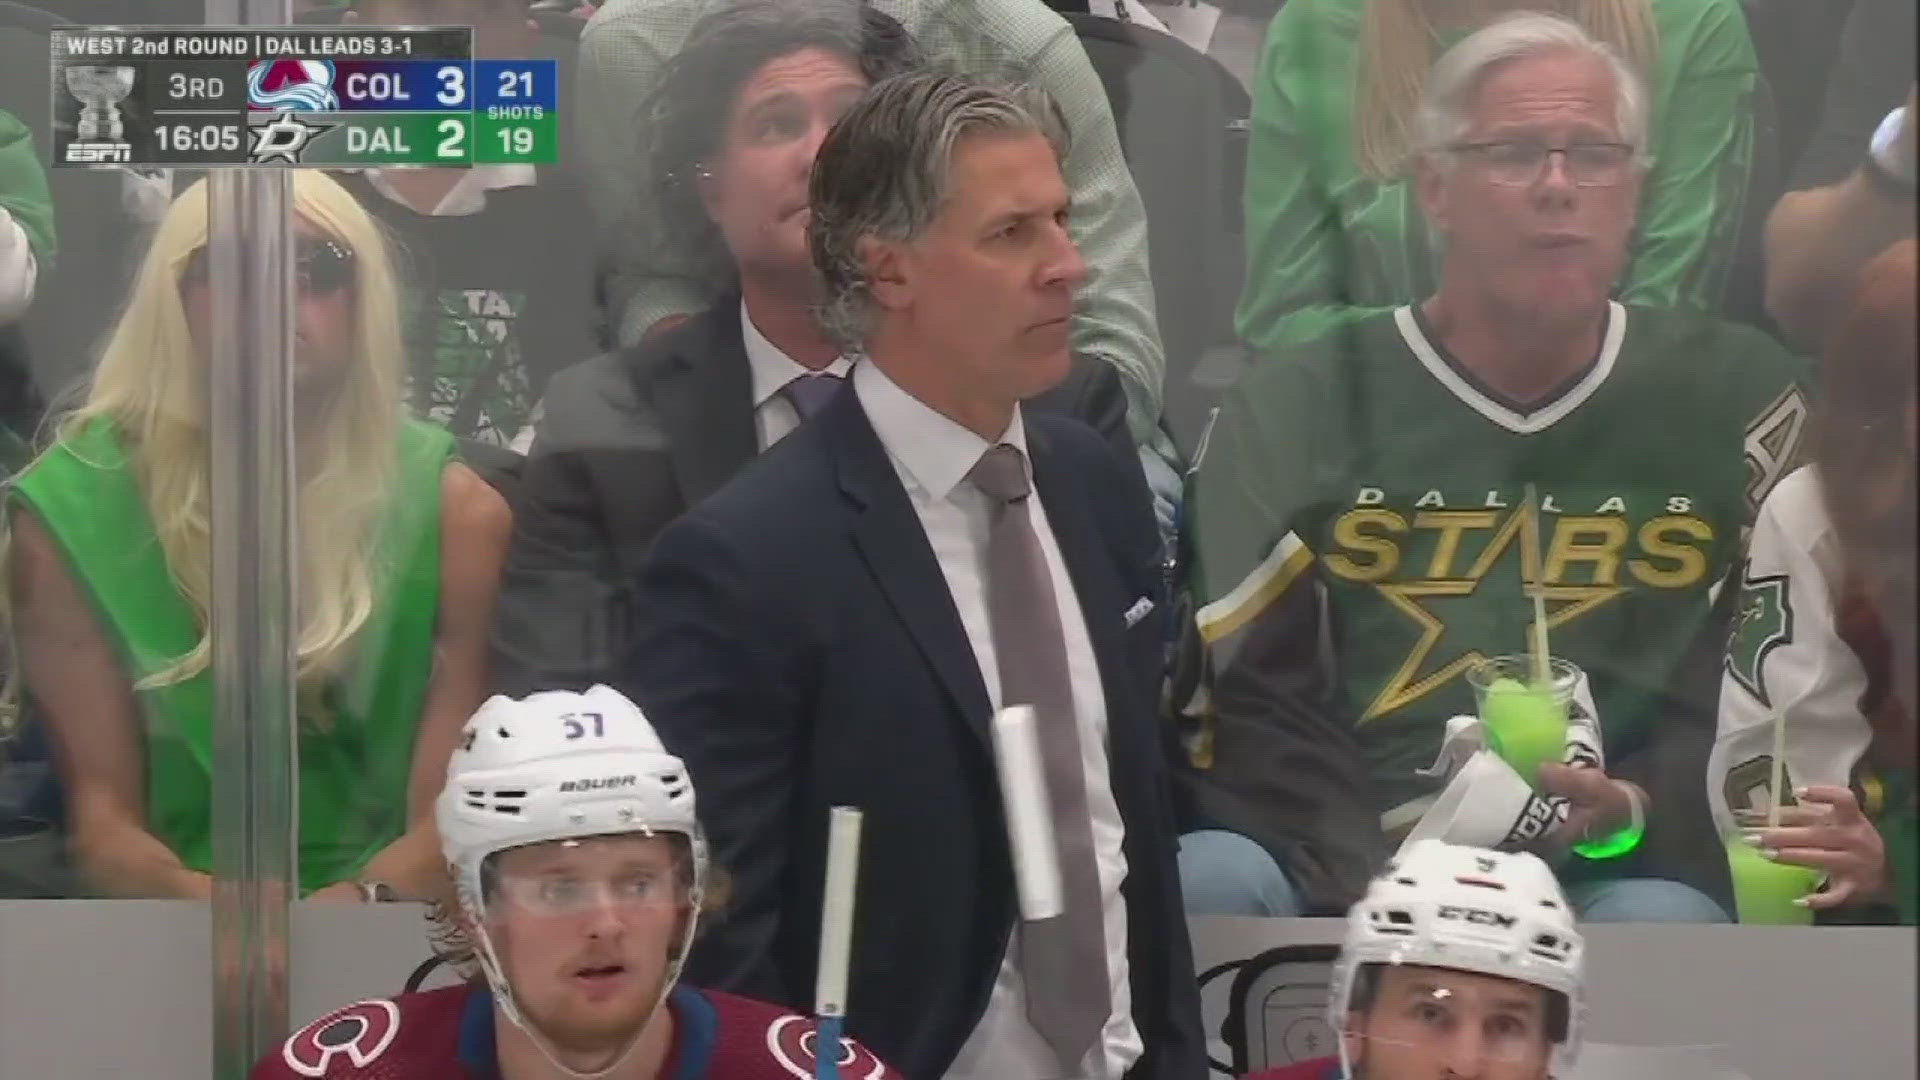 The Avalanche coach said he didn't even notice the lookalike sitting right behind him during Game 5 versus the Stars.